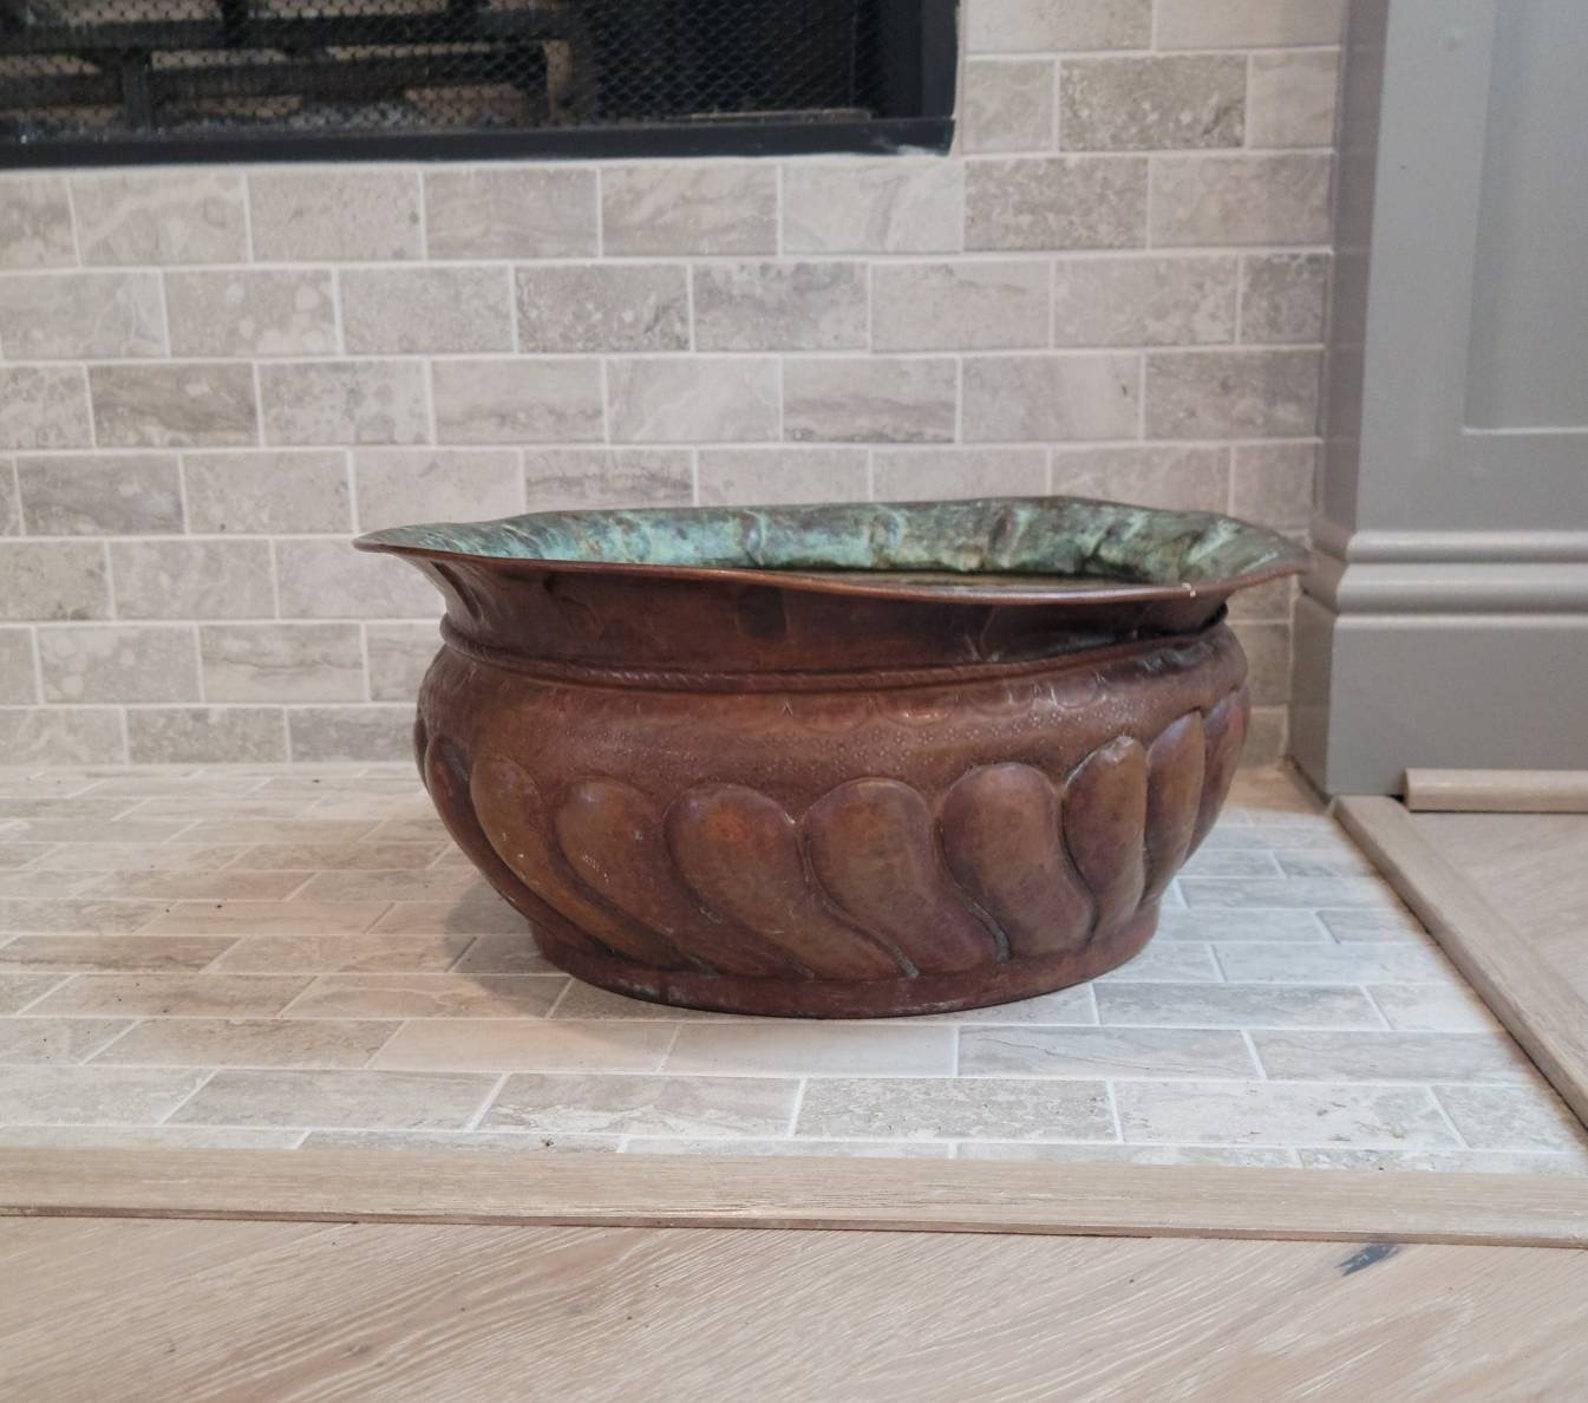 A scarce Continental hammered copper wine cistern dating to the 18th century, with beautifully aged verdigris patina!

The European antique having gadrooned lobed body with decorative pressed foliate accents, sloped rim, circular base. 

Wine